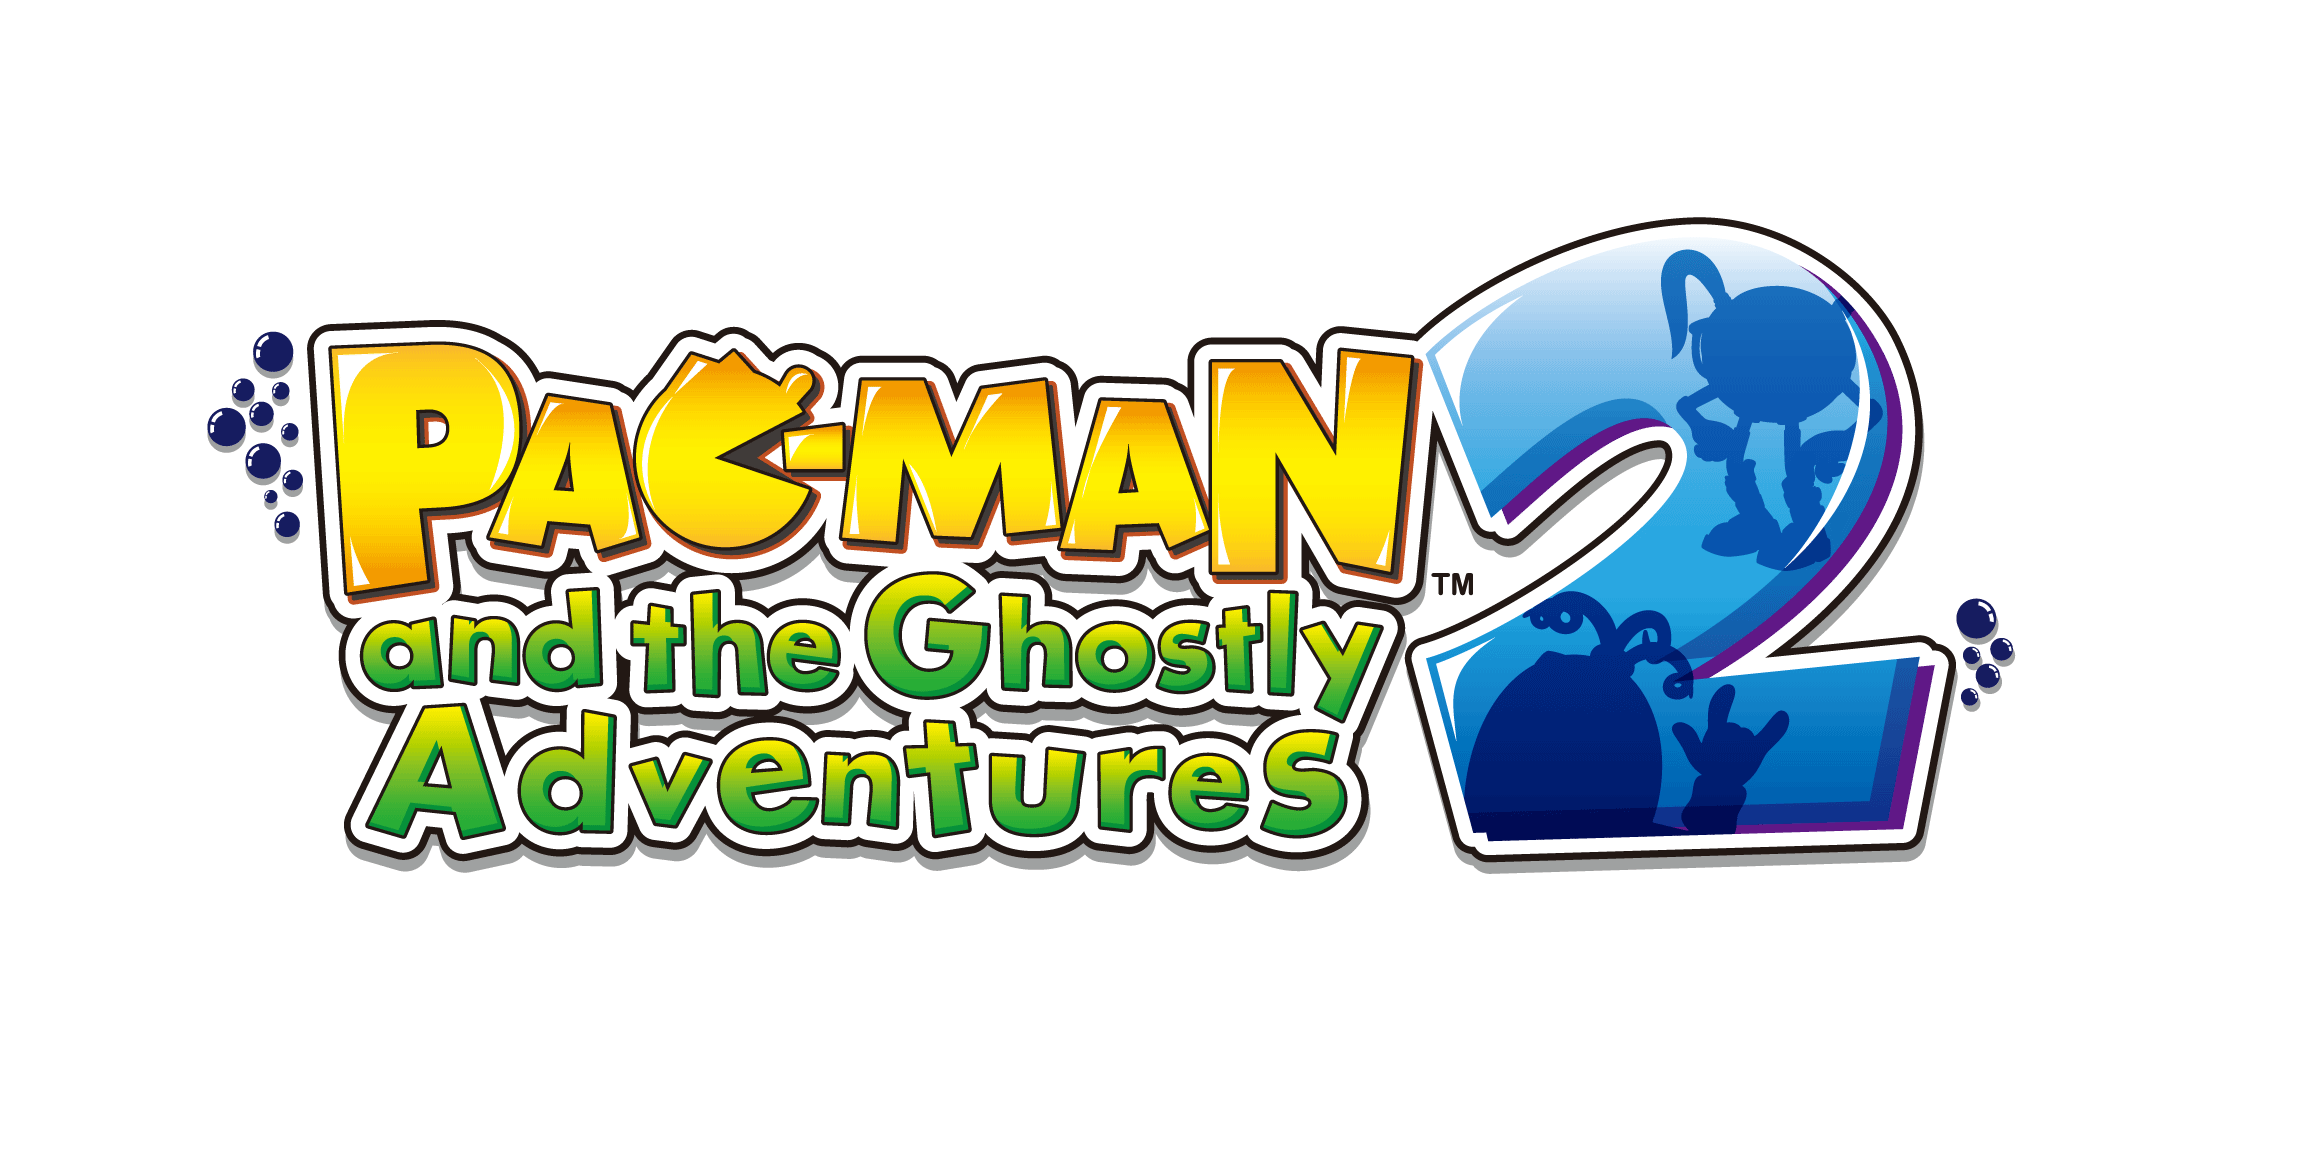 Pacman and the ghostly adventures spiral